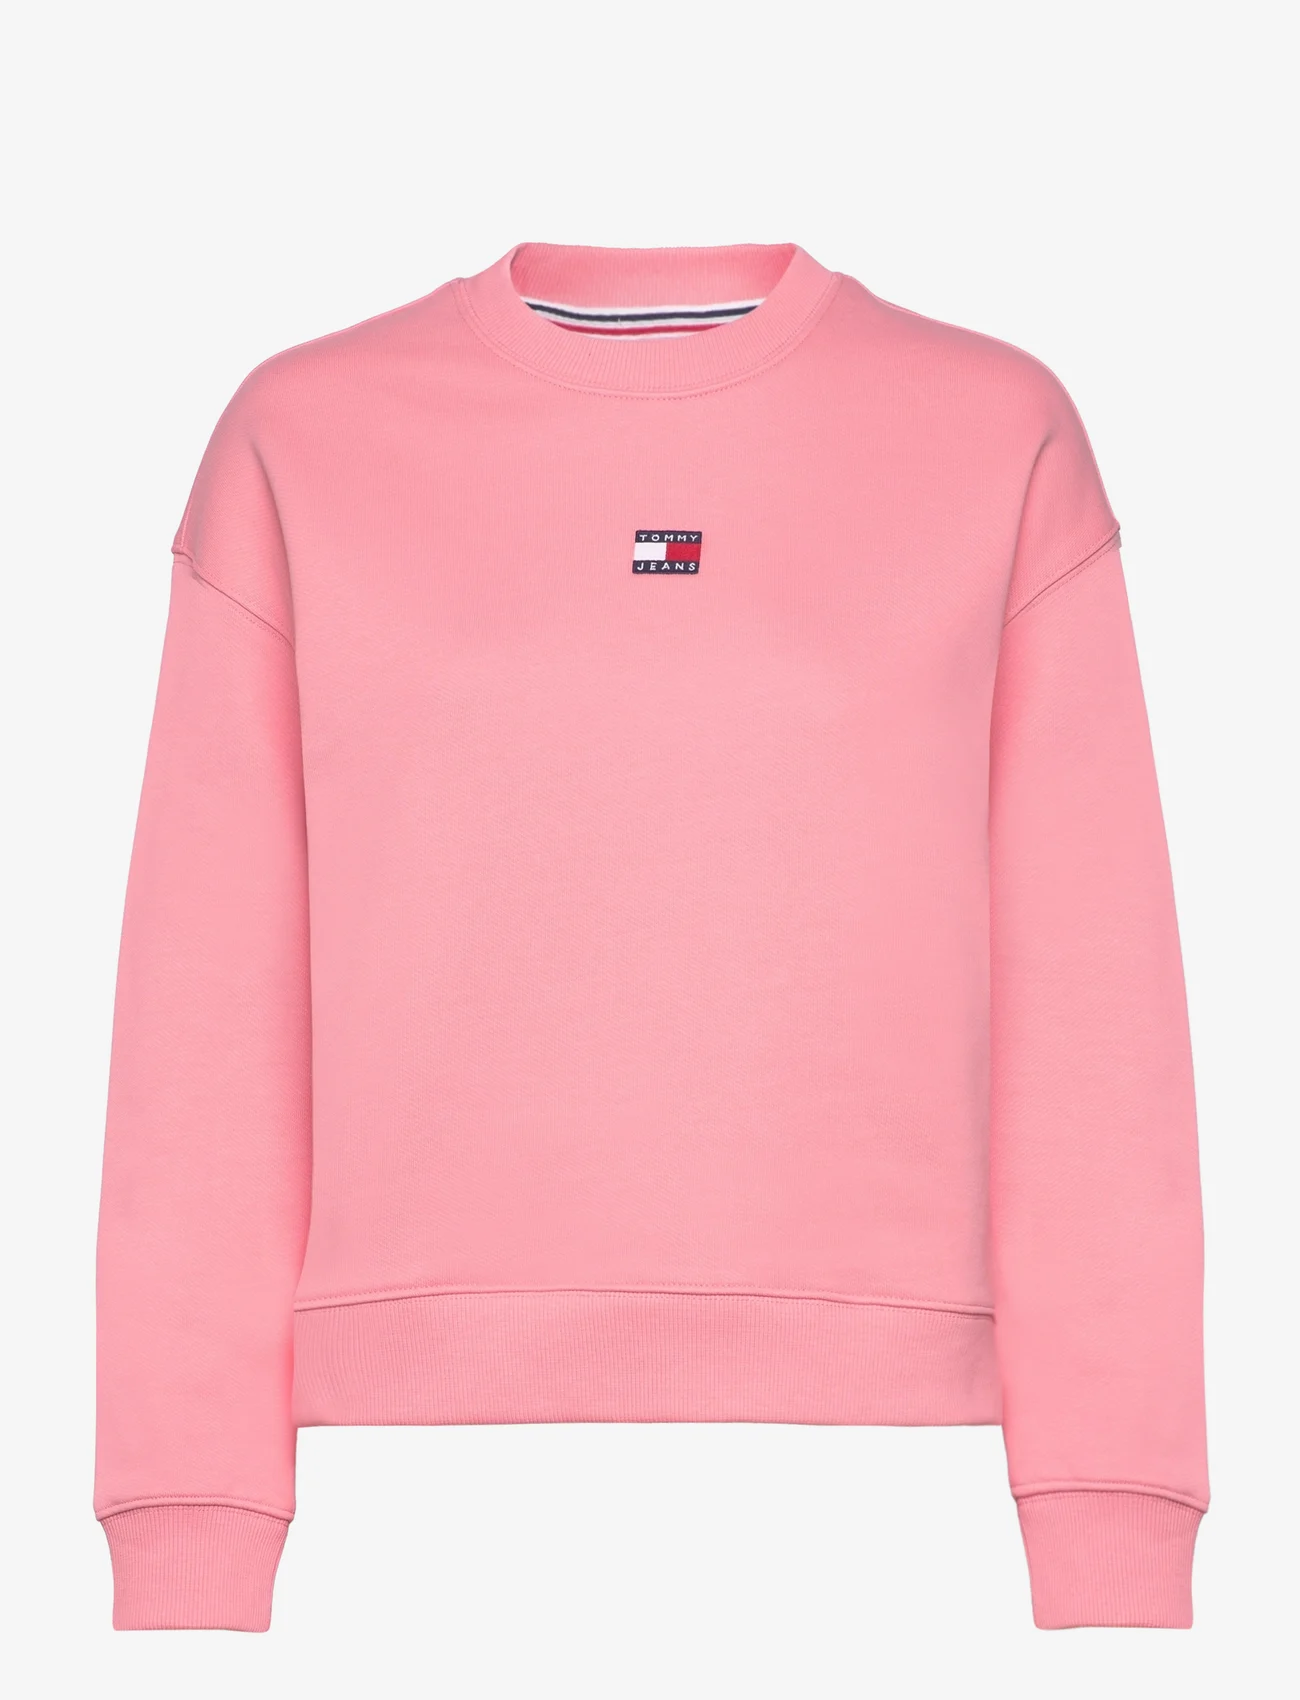 Tommy Jeans - TJW BXY BADGE CREW EXT - sweatshirts & hoodies - tickled pink - 0